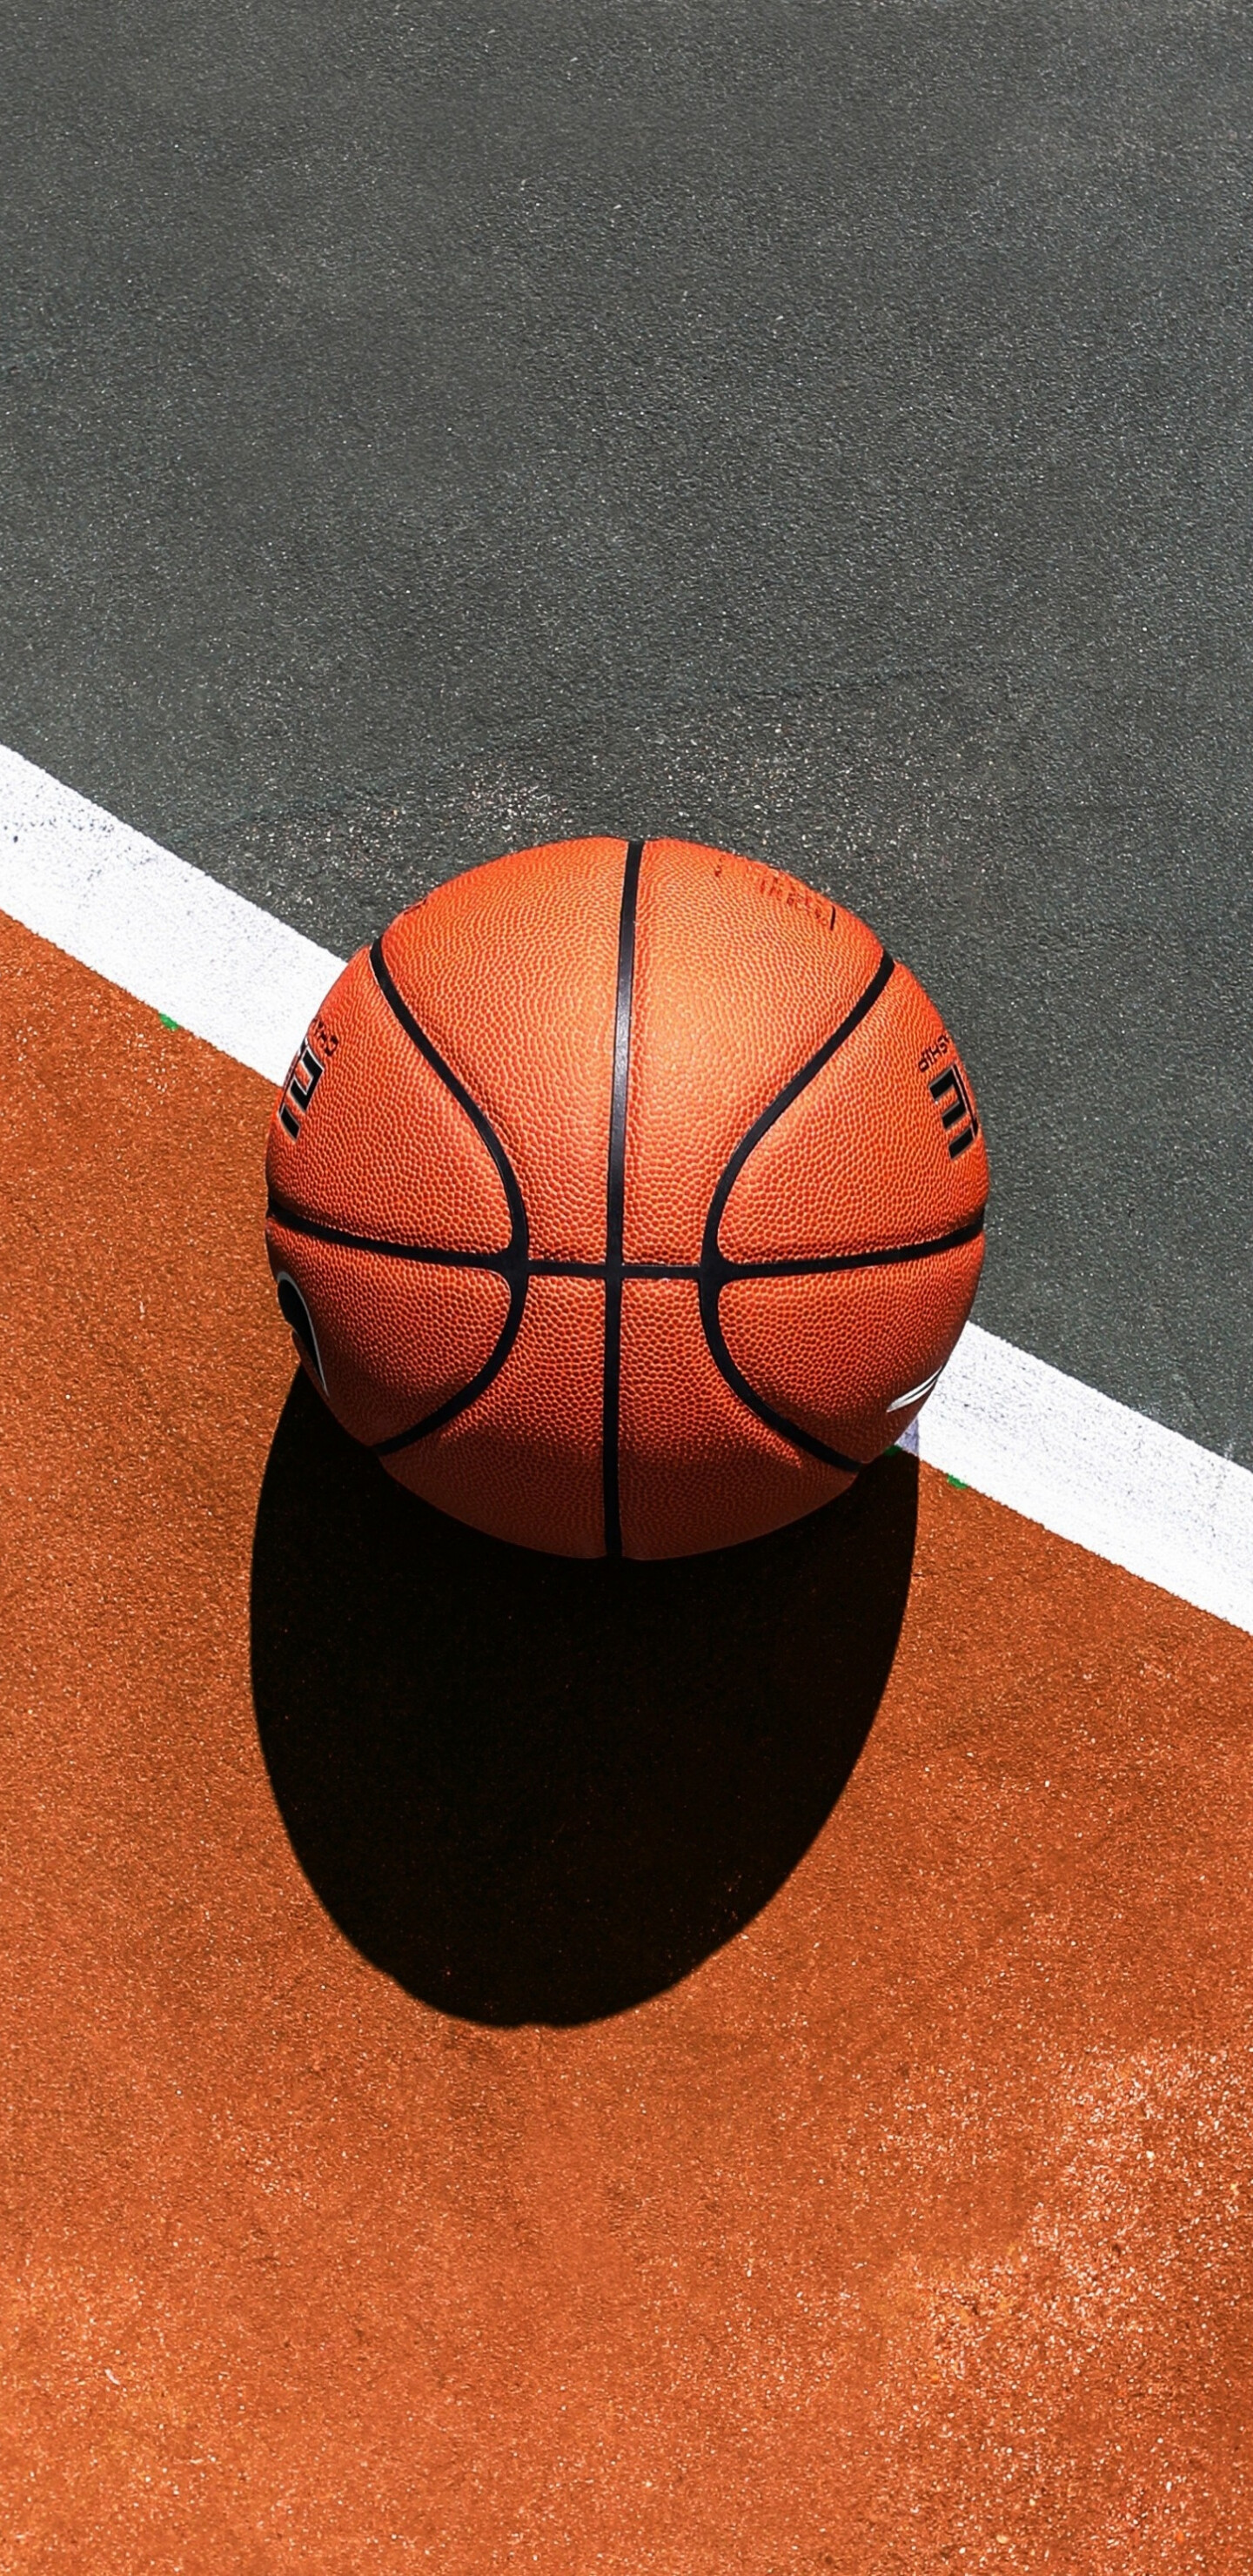 Basketball sports court, Samsung Galaxy S8, HD image background, Immersive experience, 1440x2960 HD Phone